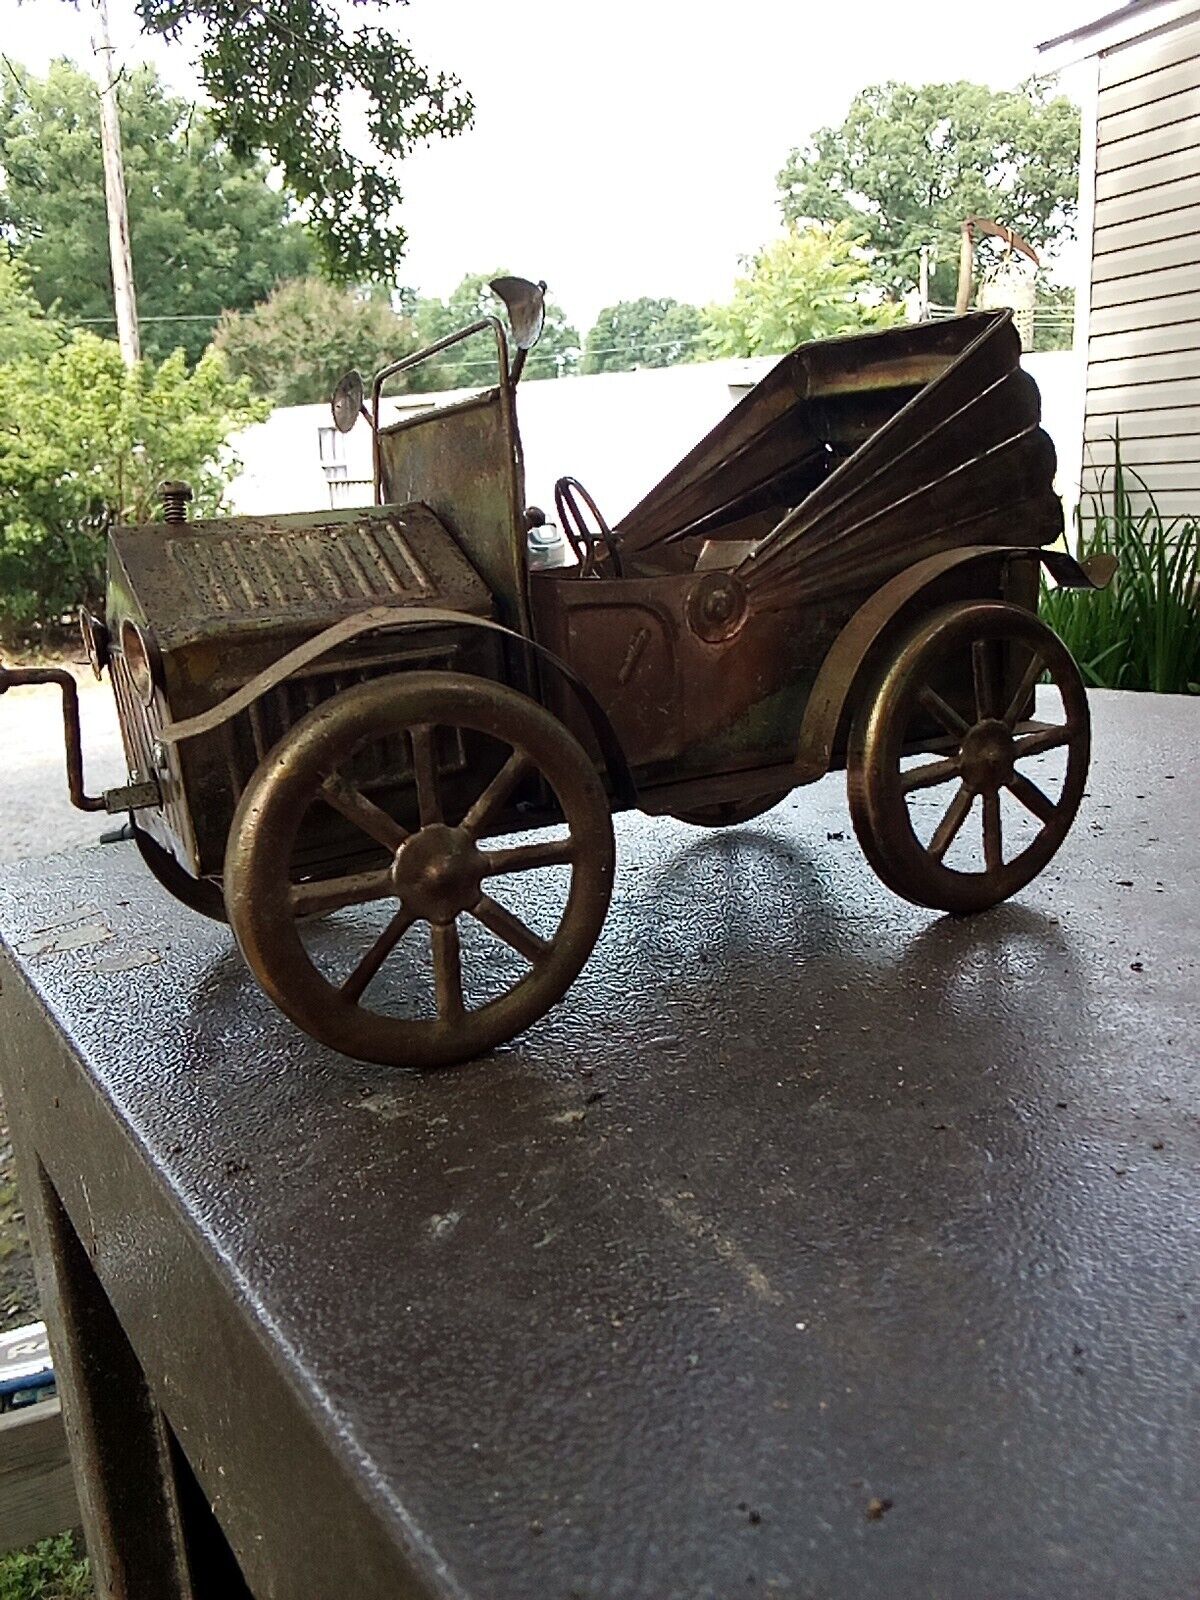 Vintage Copper Antique Convertible Car/Music Box - Plays King Of the Road.